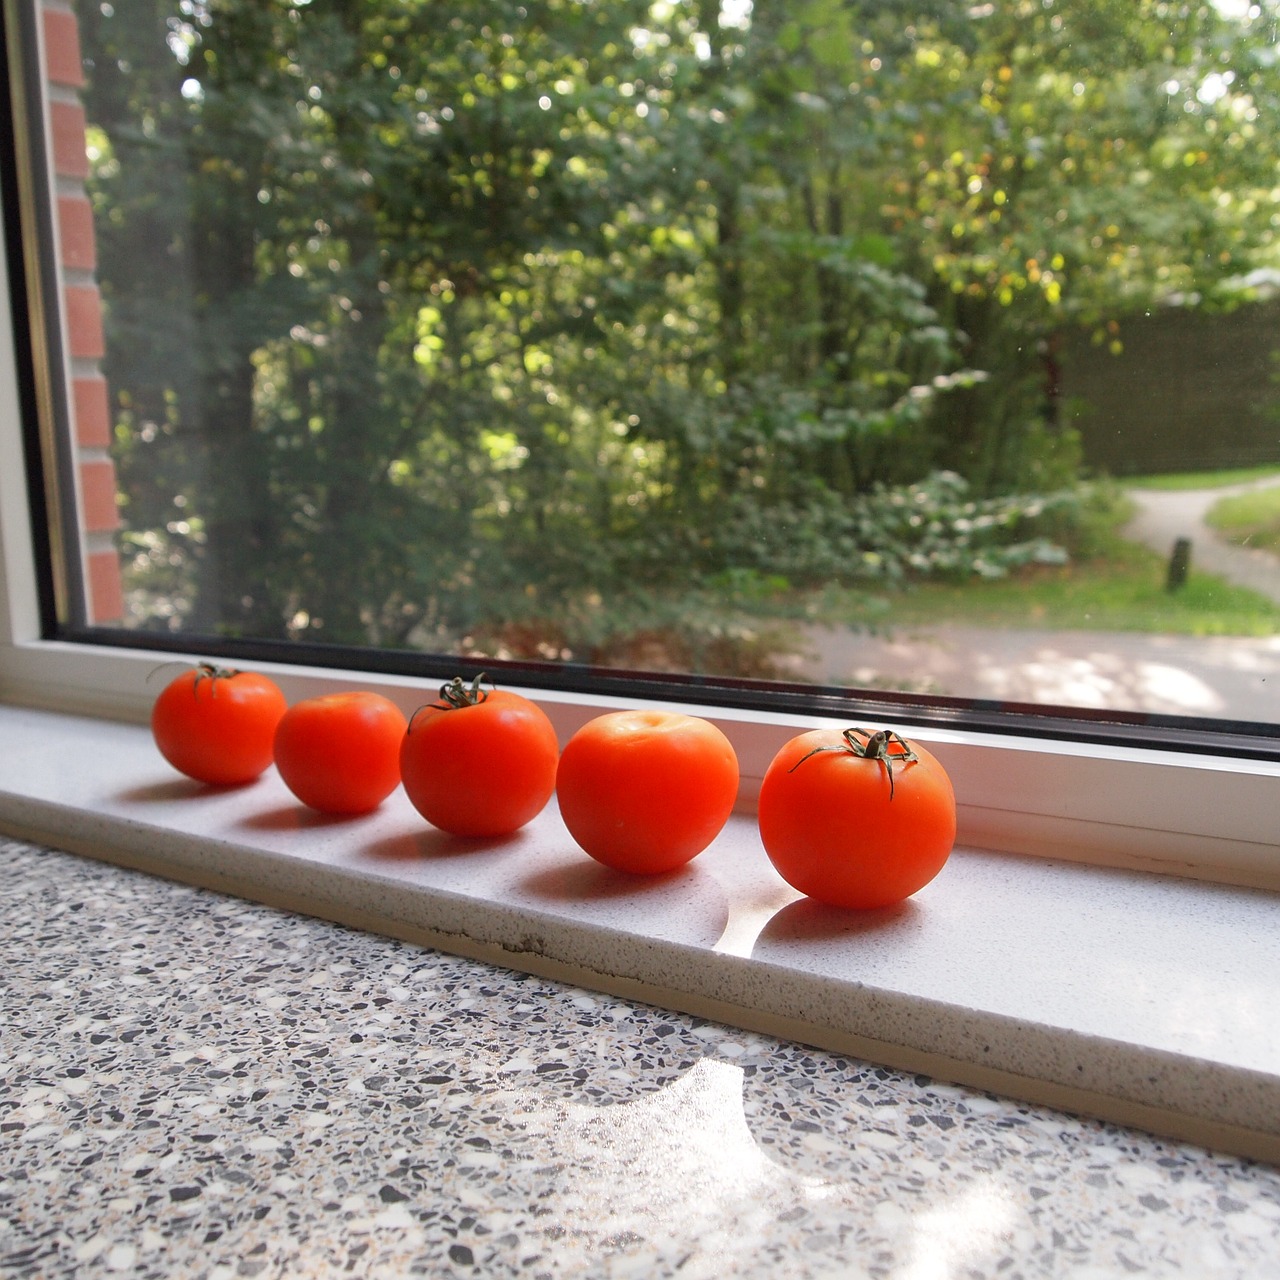 tomatoes window sill red free photo